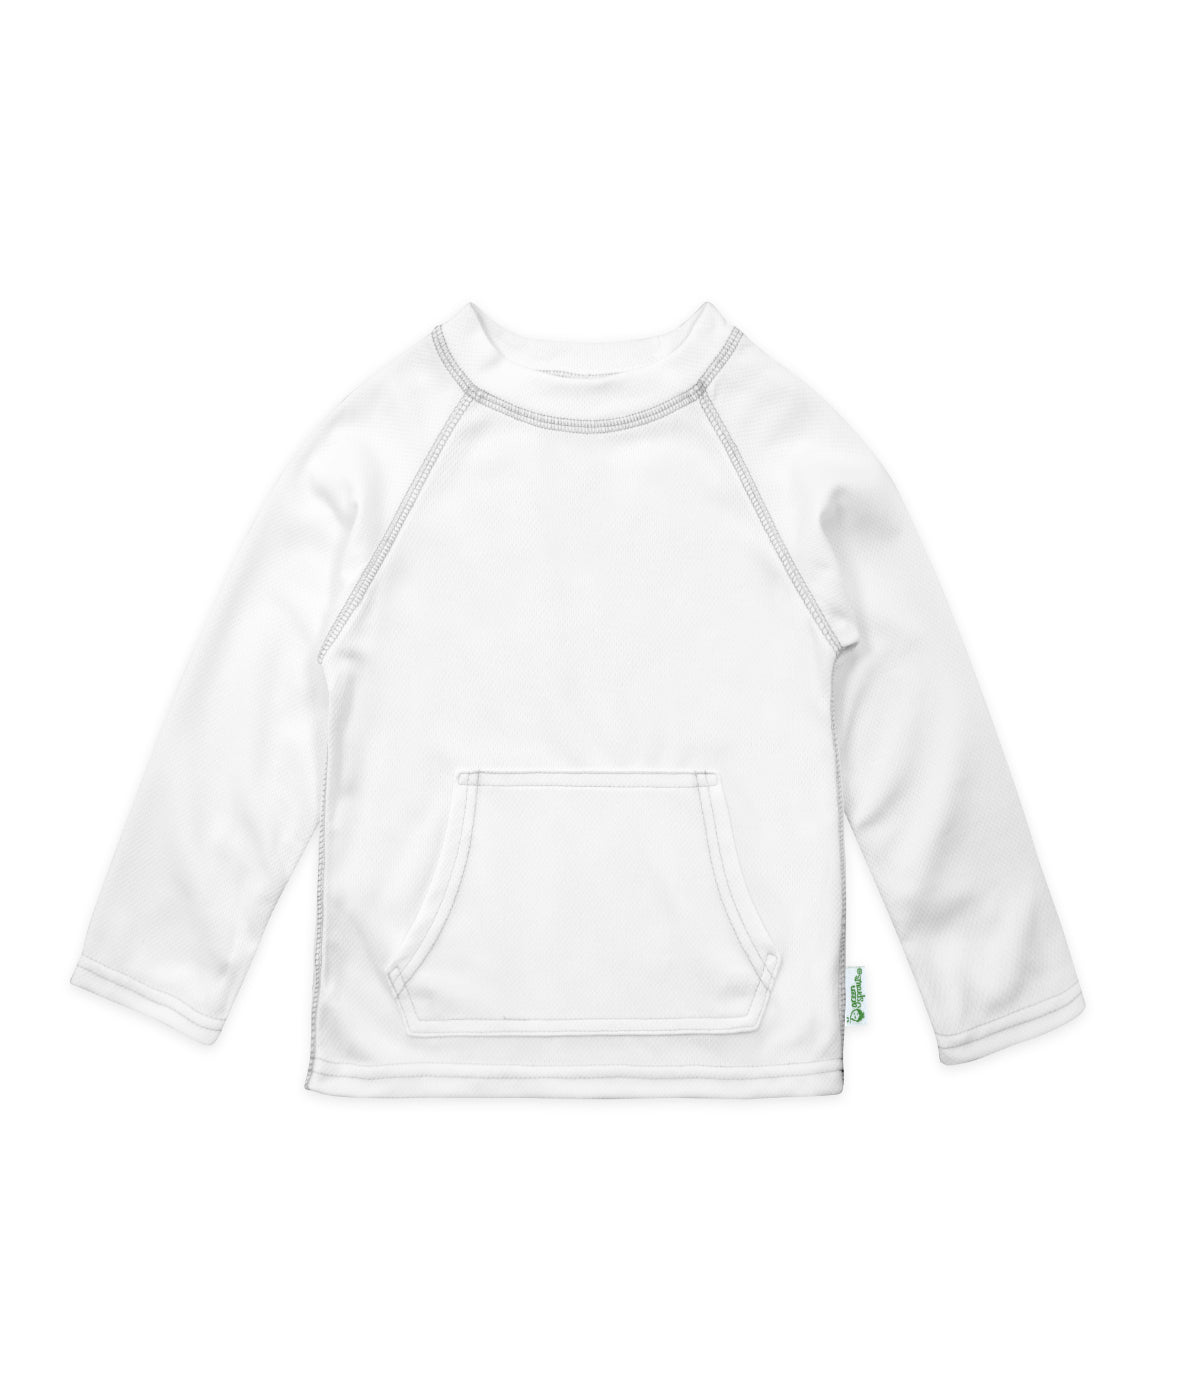 Breathable Sun Protection Shirt White